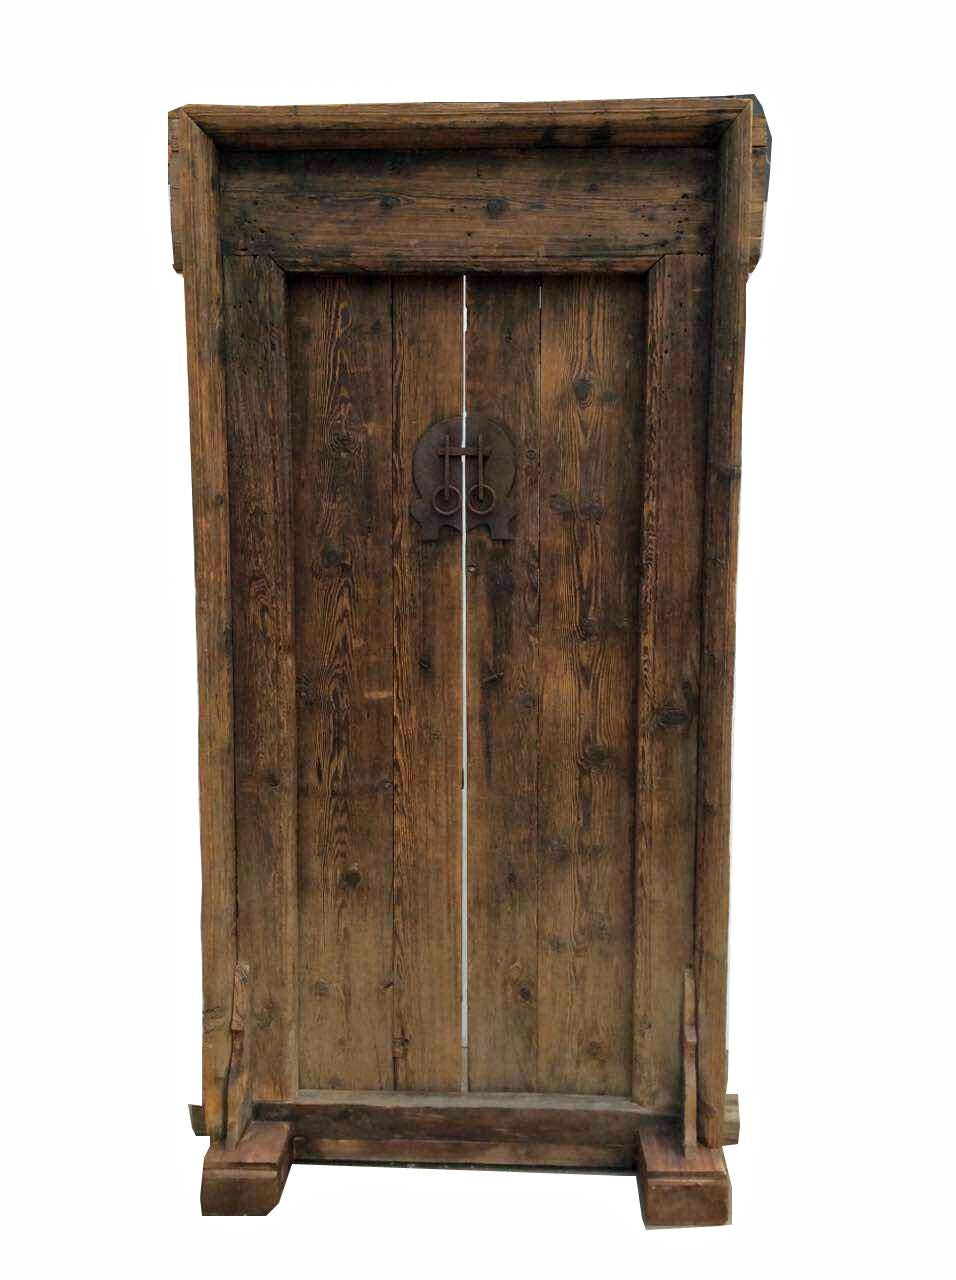 This antique door is in the same condition as it was found in Shanxi, China. Original wood, brassware and complete door frame. Its natural aged wood, wood knots, lines, and cracks add unique characters to this antique door from Far East.